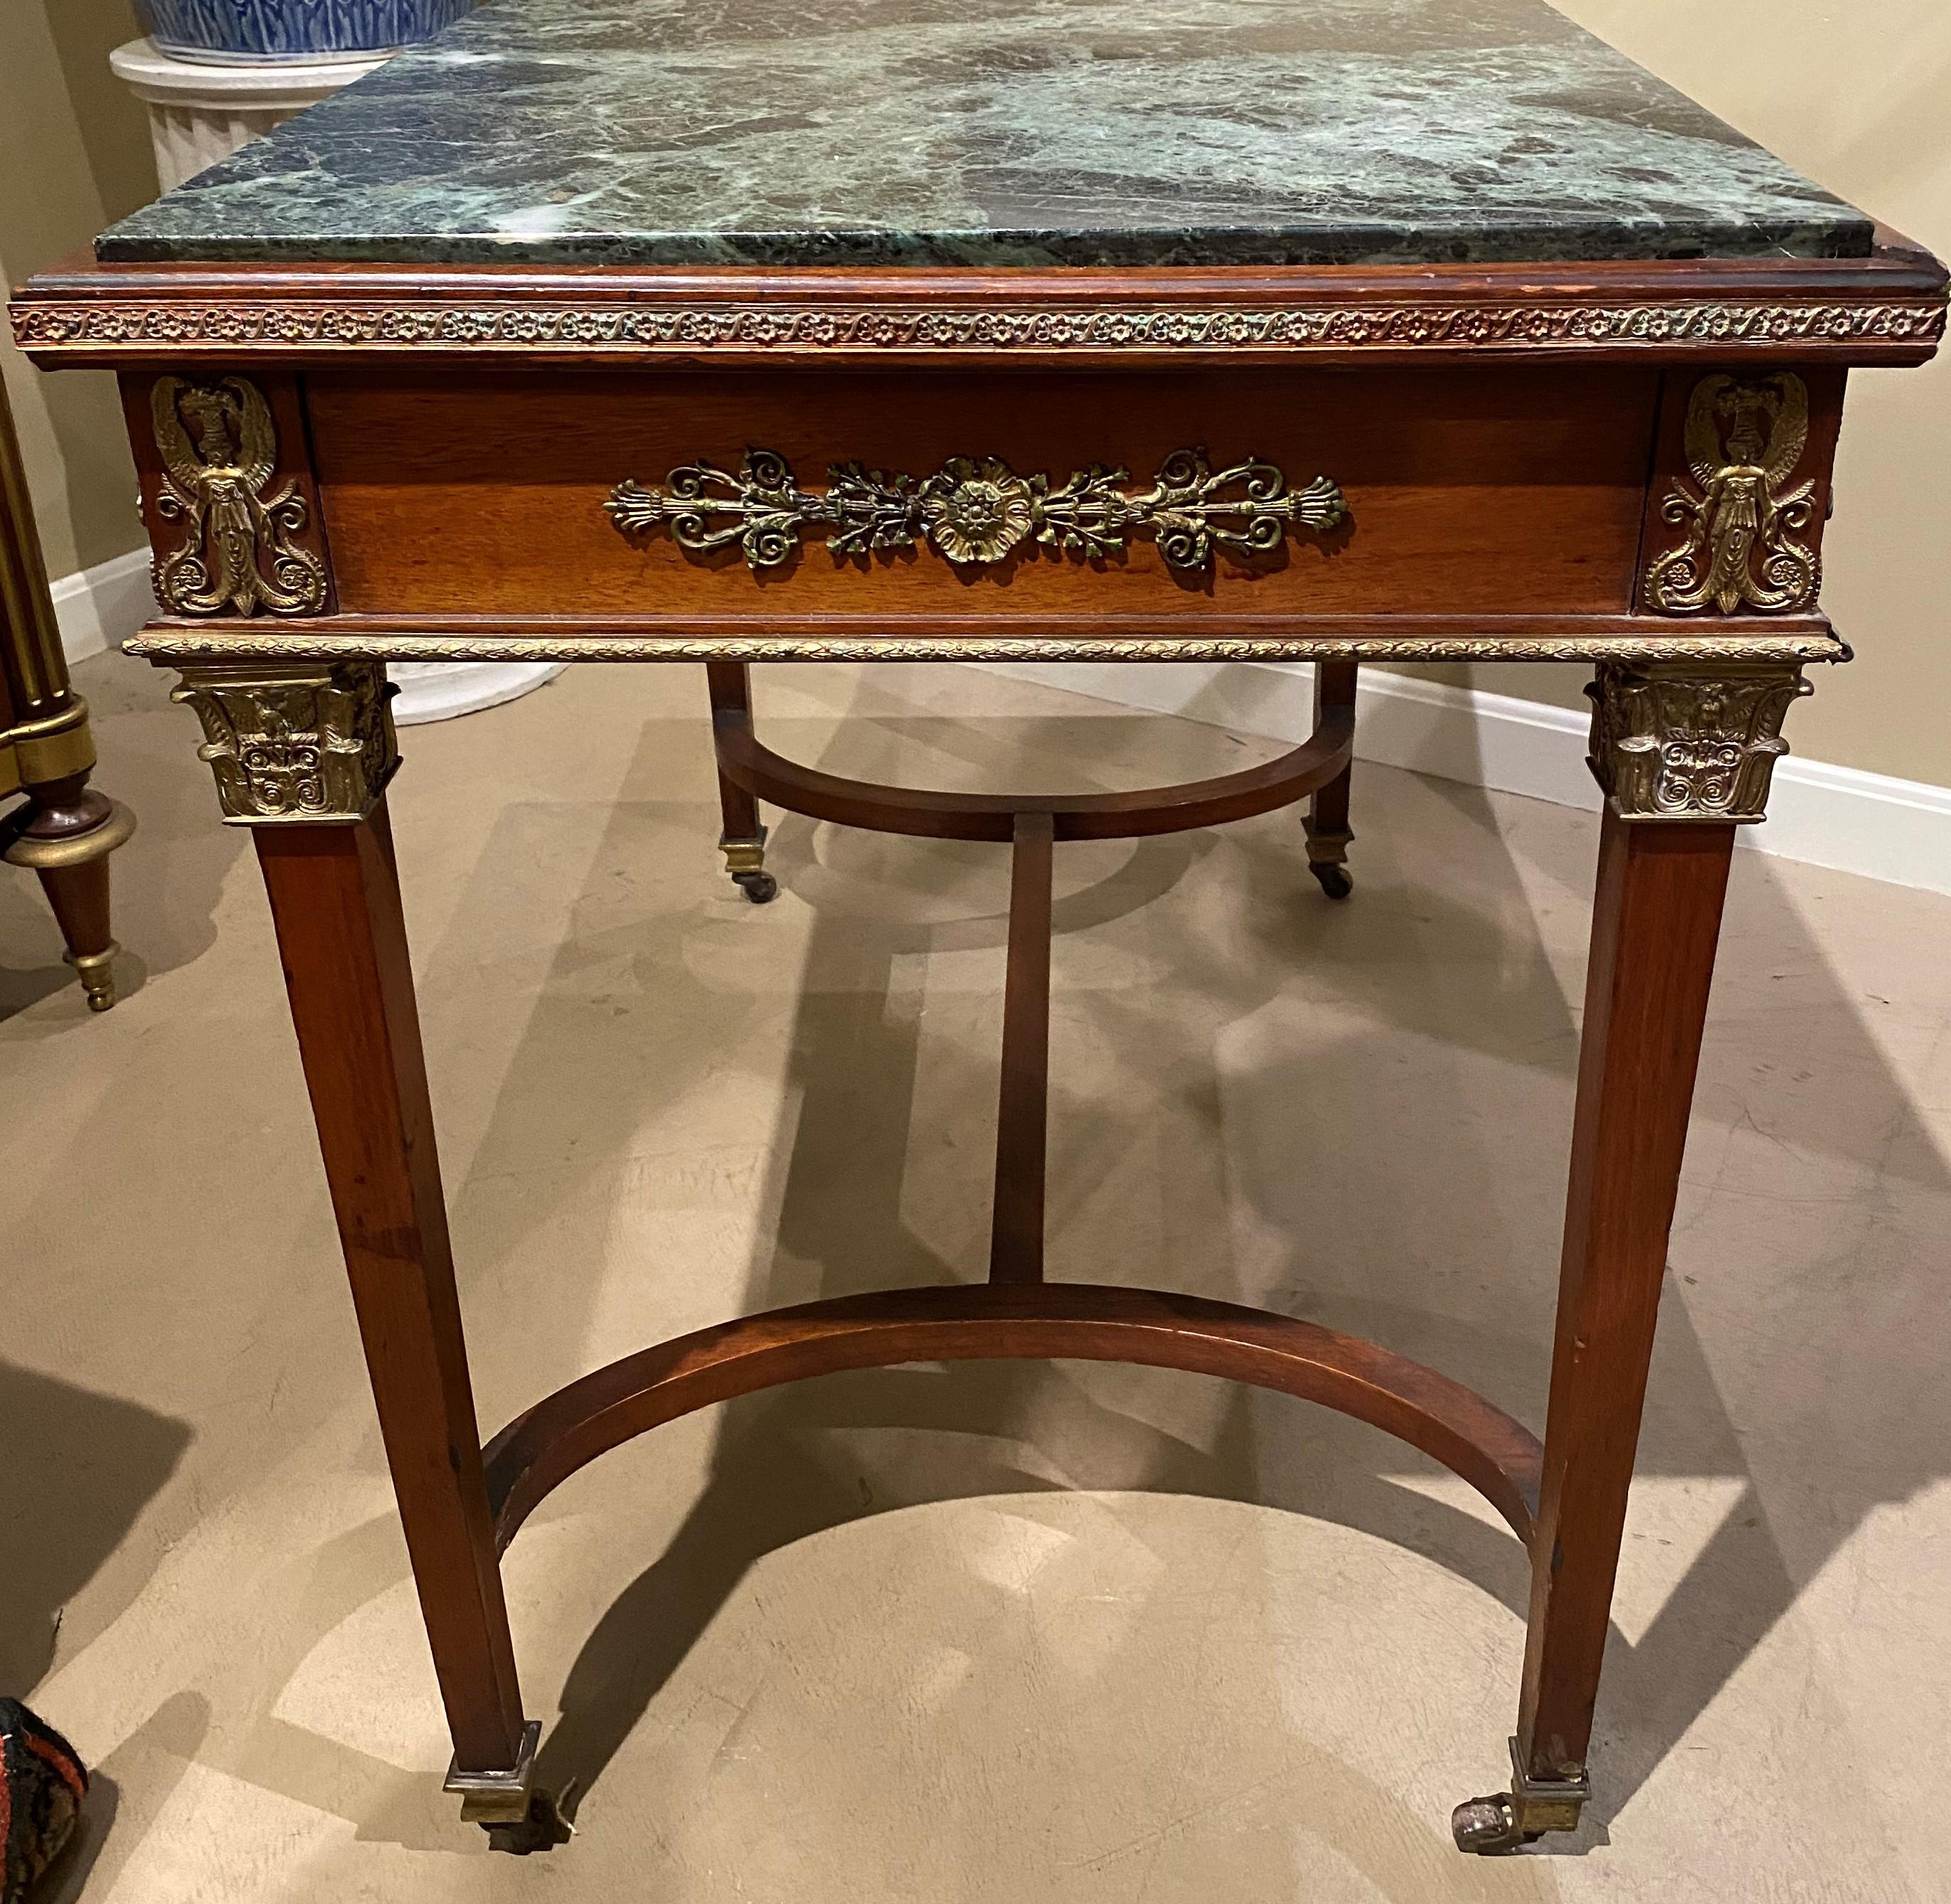 19th Century RJ Horner & Co French Marble Top One-Drawer Writing Table with Ormolu